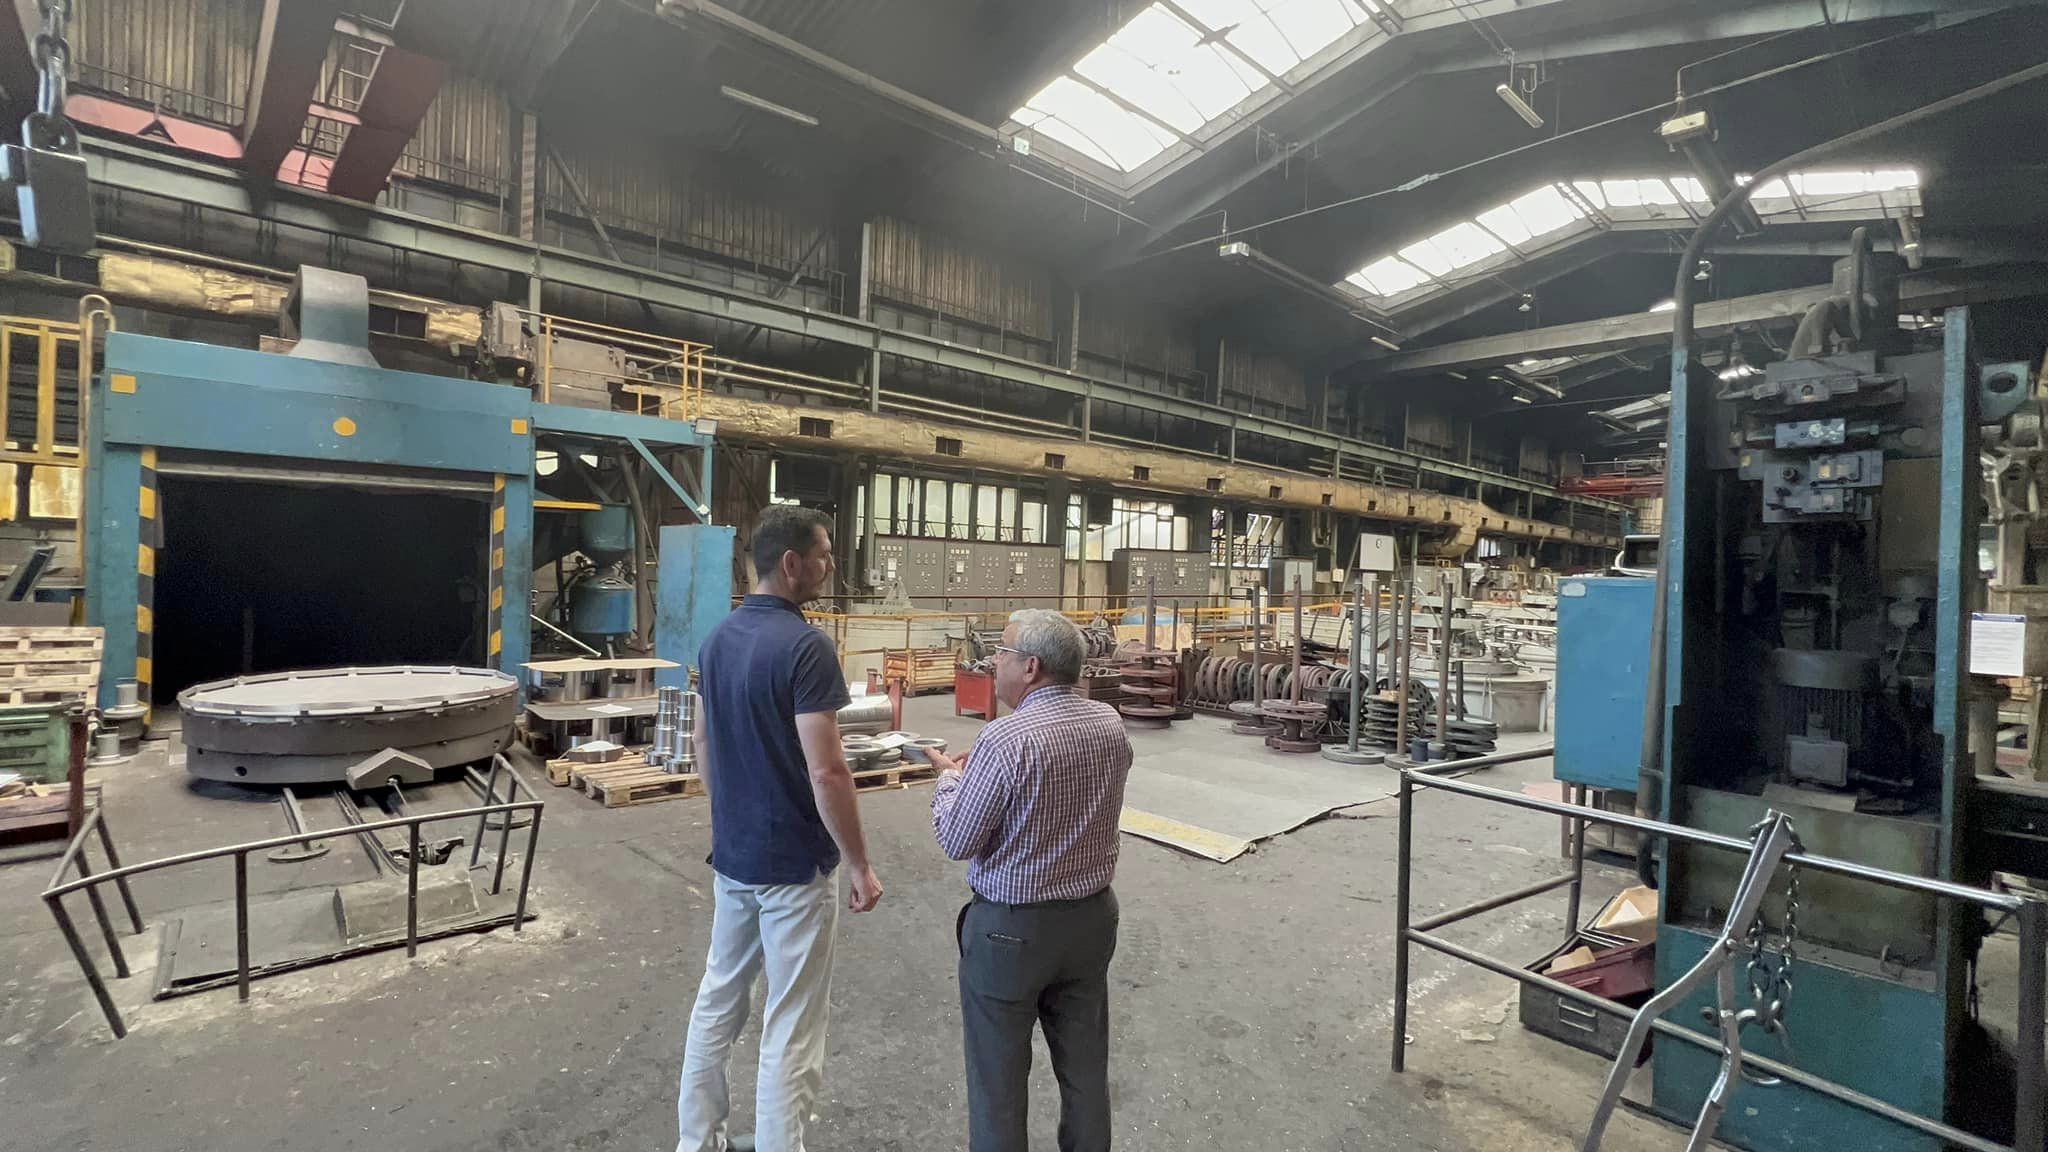 The visit of Engineer Medhat Al-Shanbaki, Chairman of the Board of Directors of Sphinx Company, to one of the factories of our suppliers in Europe